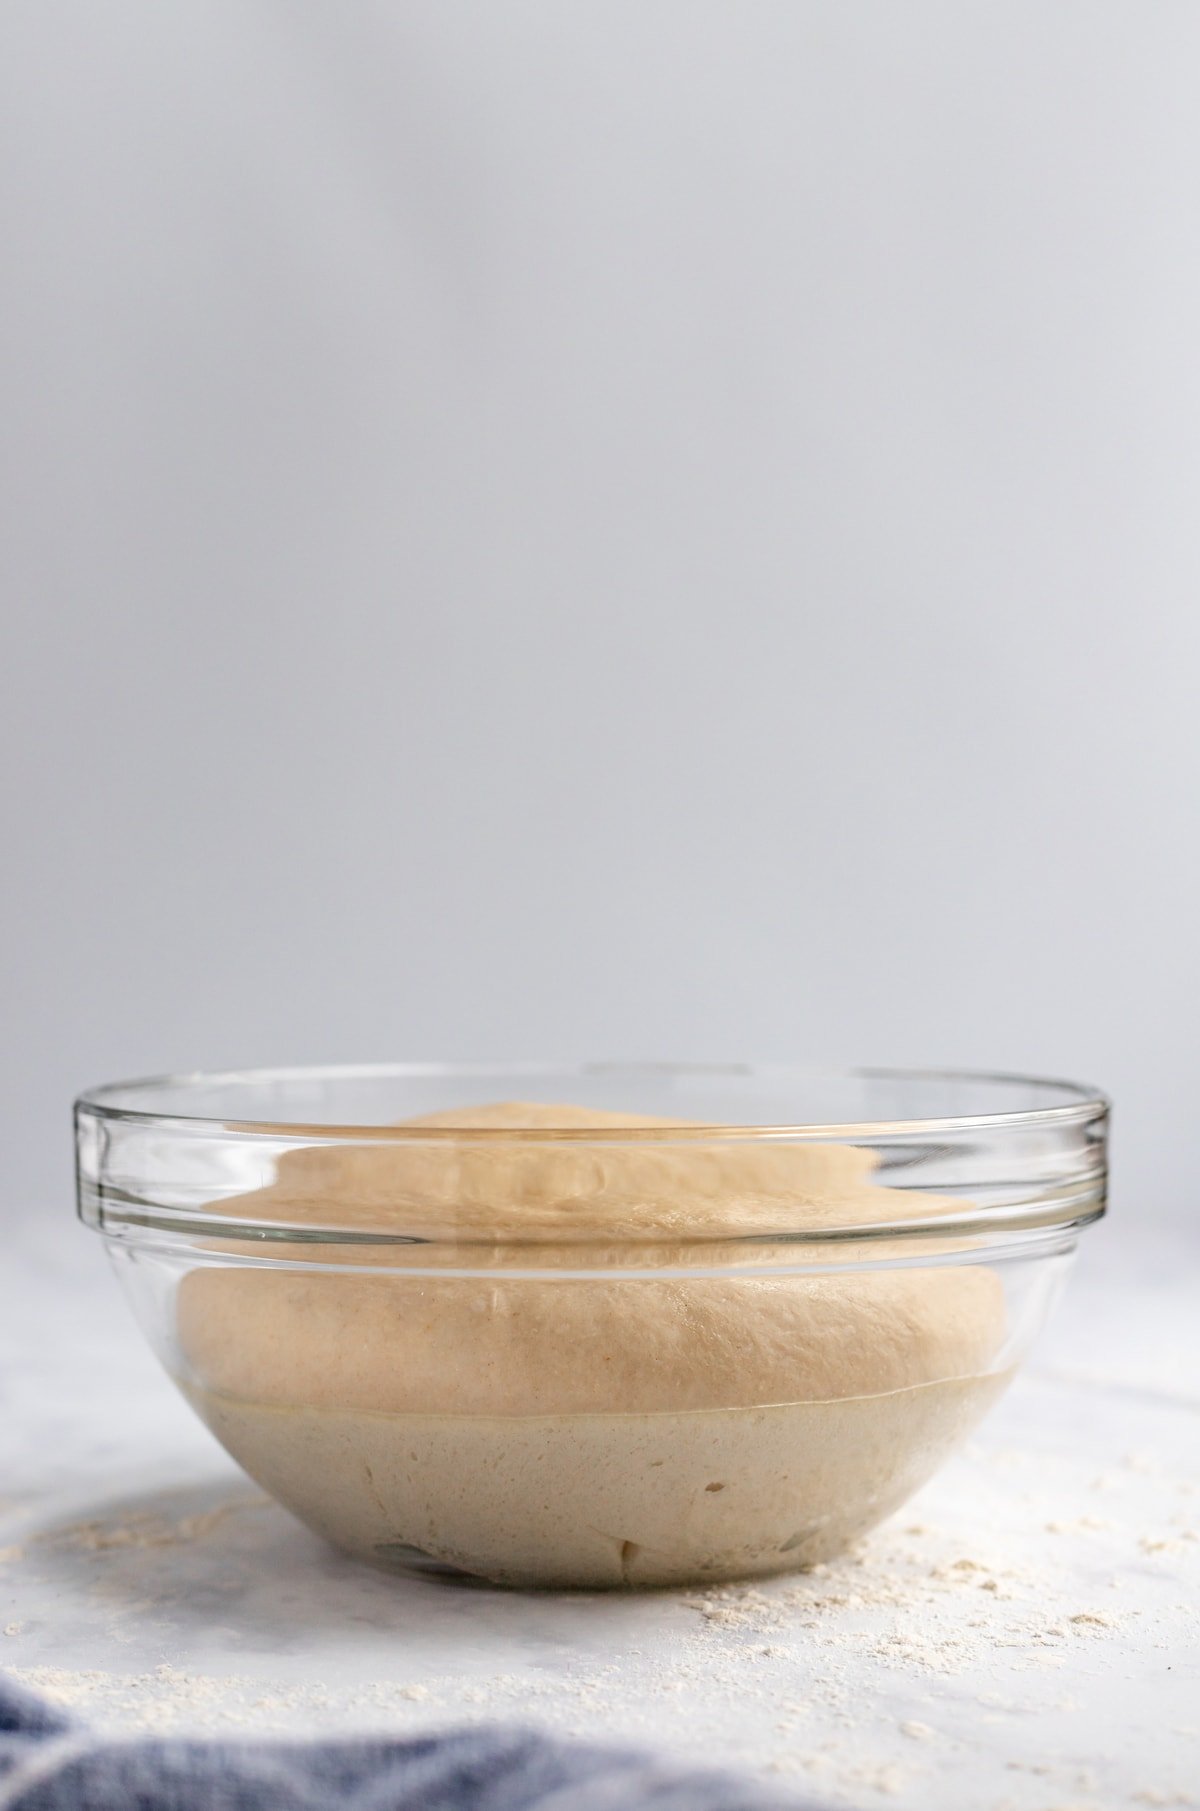 Dough in a bowl that has been risen at a side angle.